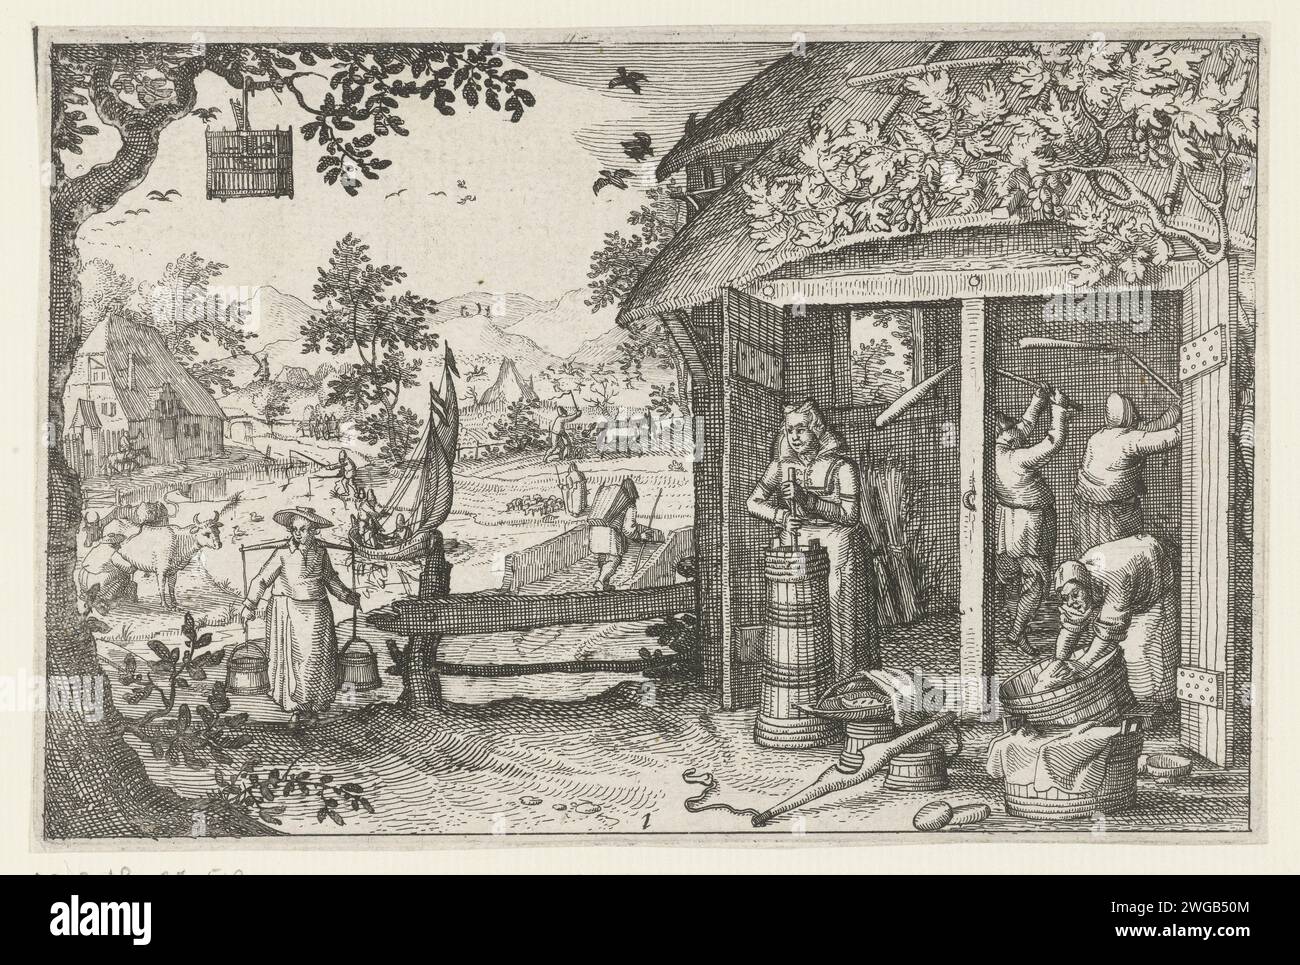 Agriculture and Livestock, ca. 1600, 1608 print Agriculture and animal husbandry. In front of a shed, milk is chopped into butter and the grain is thirsty. On the left comes a milkmaid with a yoke on the shoulders. The cows are milked in the background, harvest and fished. No. 1 from series professions in Noord-Holland. Northern Netherlands paper etching agriculture, cattle-breeding, horticulture, flowerculture, etc.. harvest. milking. churning. transportation of milk North Holland Stock Photo